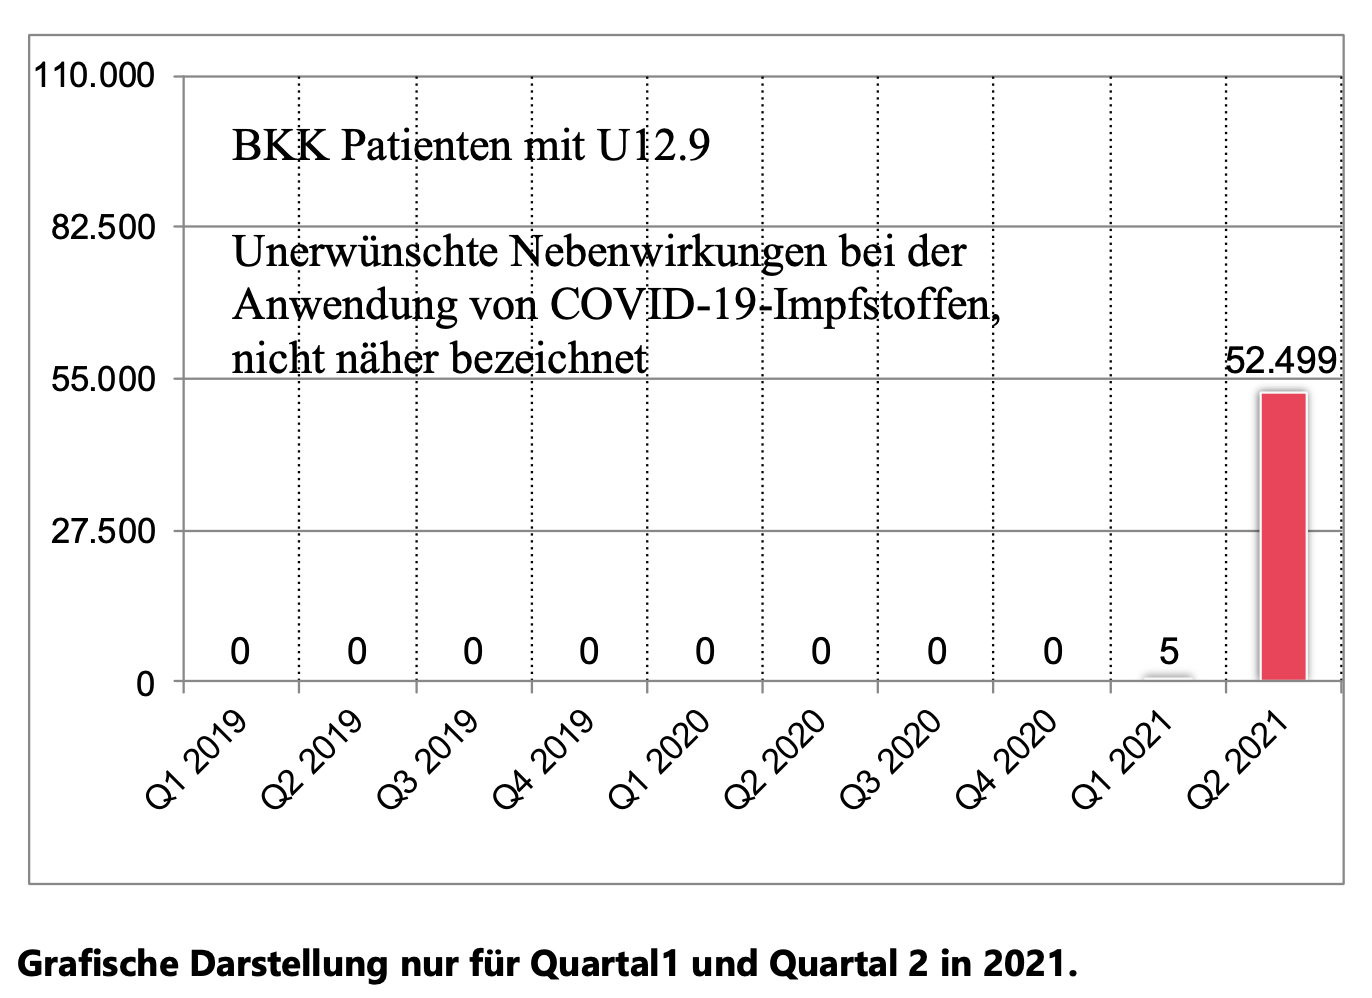 Graph for Q1 and Q2 in 2021: BKK Press Release